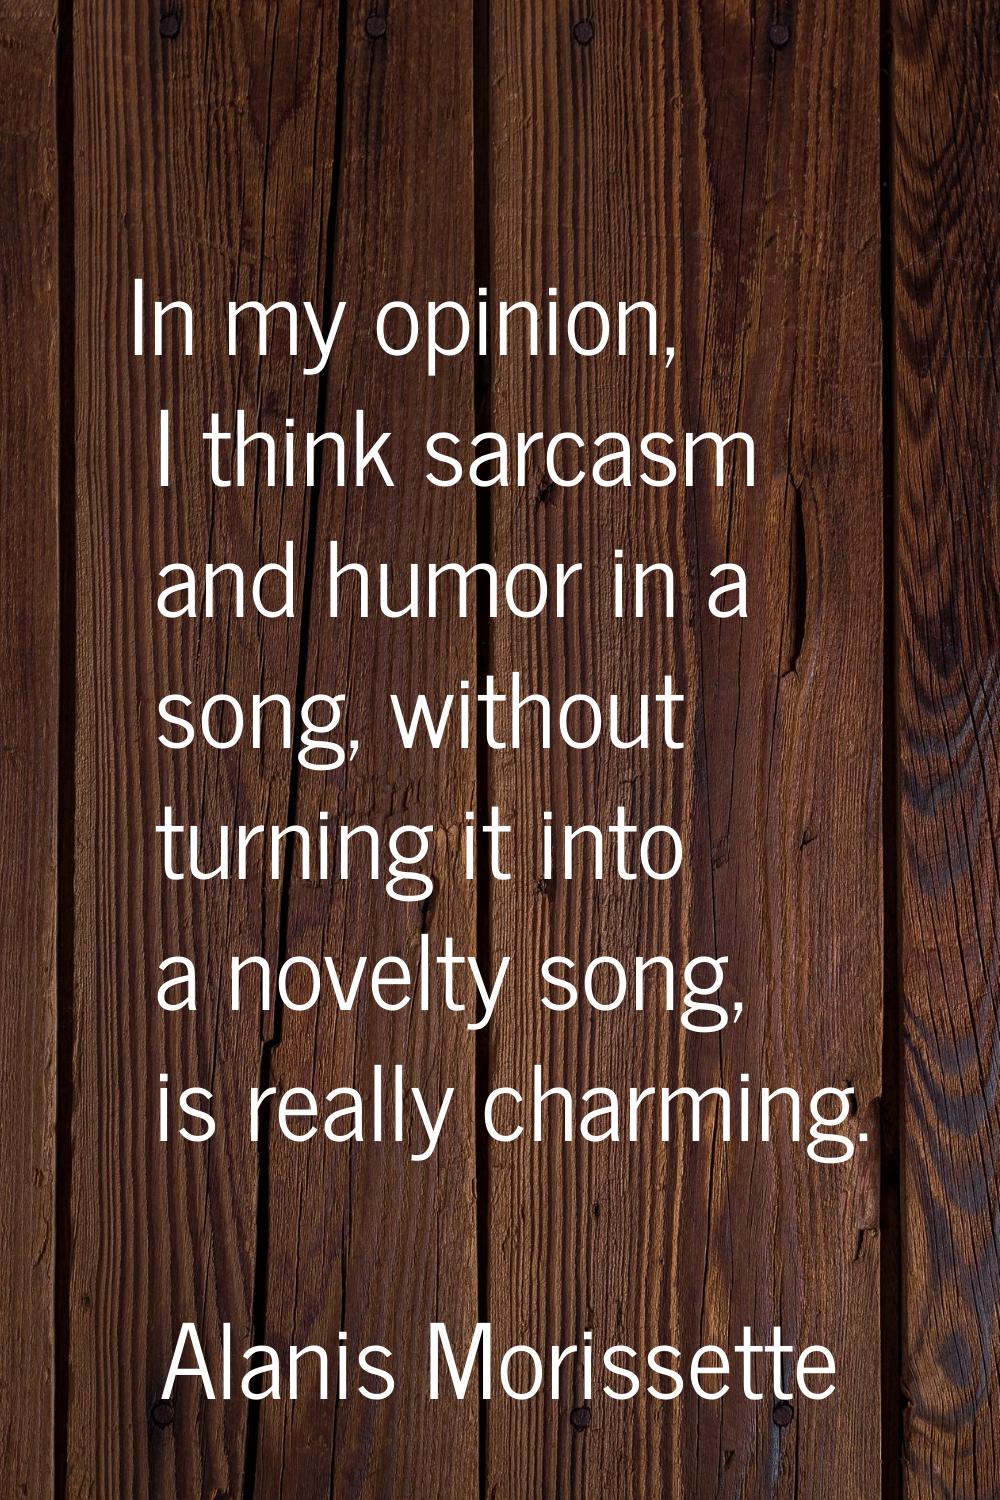 In my opinion, I think sarcasm and humor in a song, without turning it into a novelty song, is real